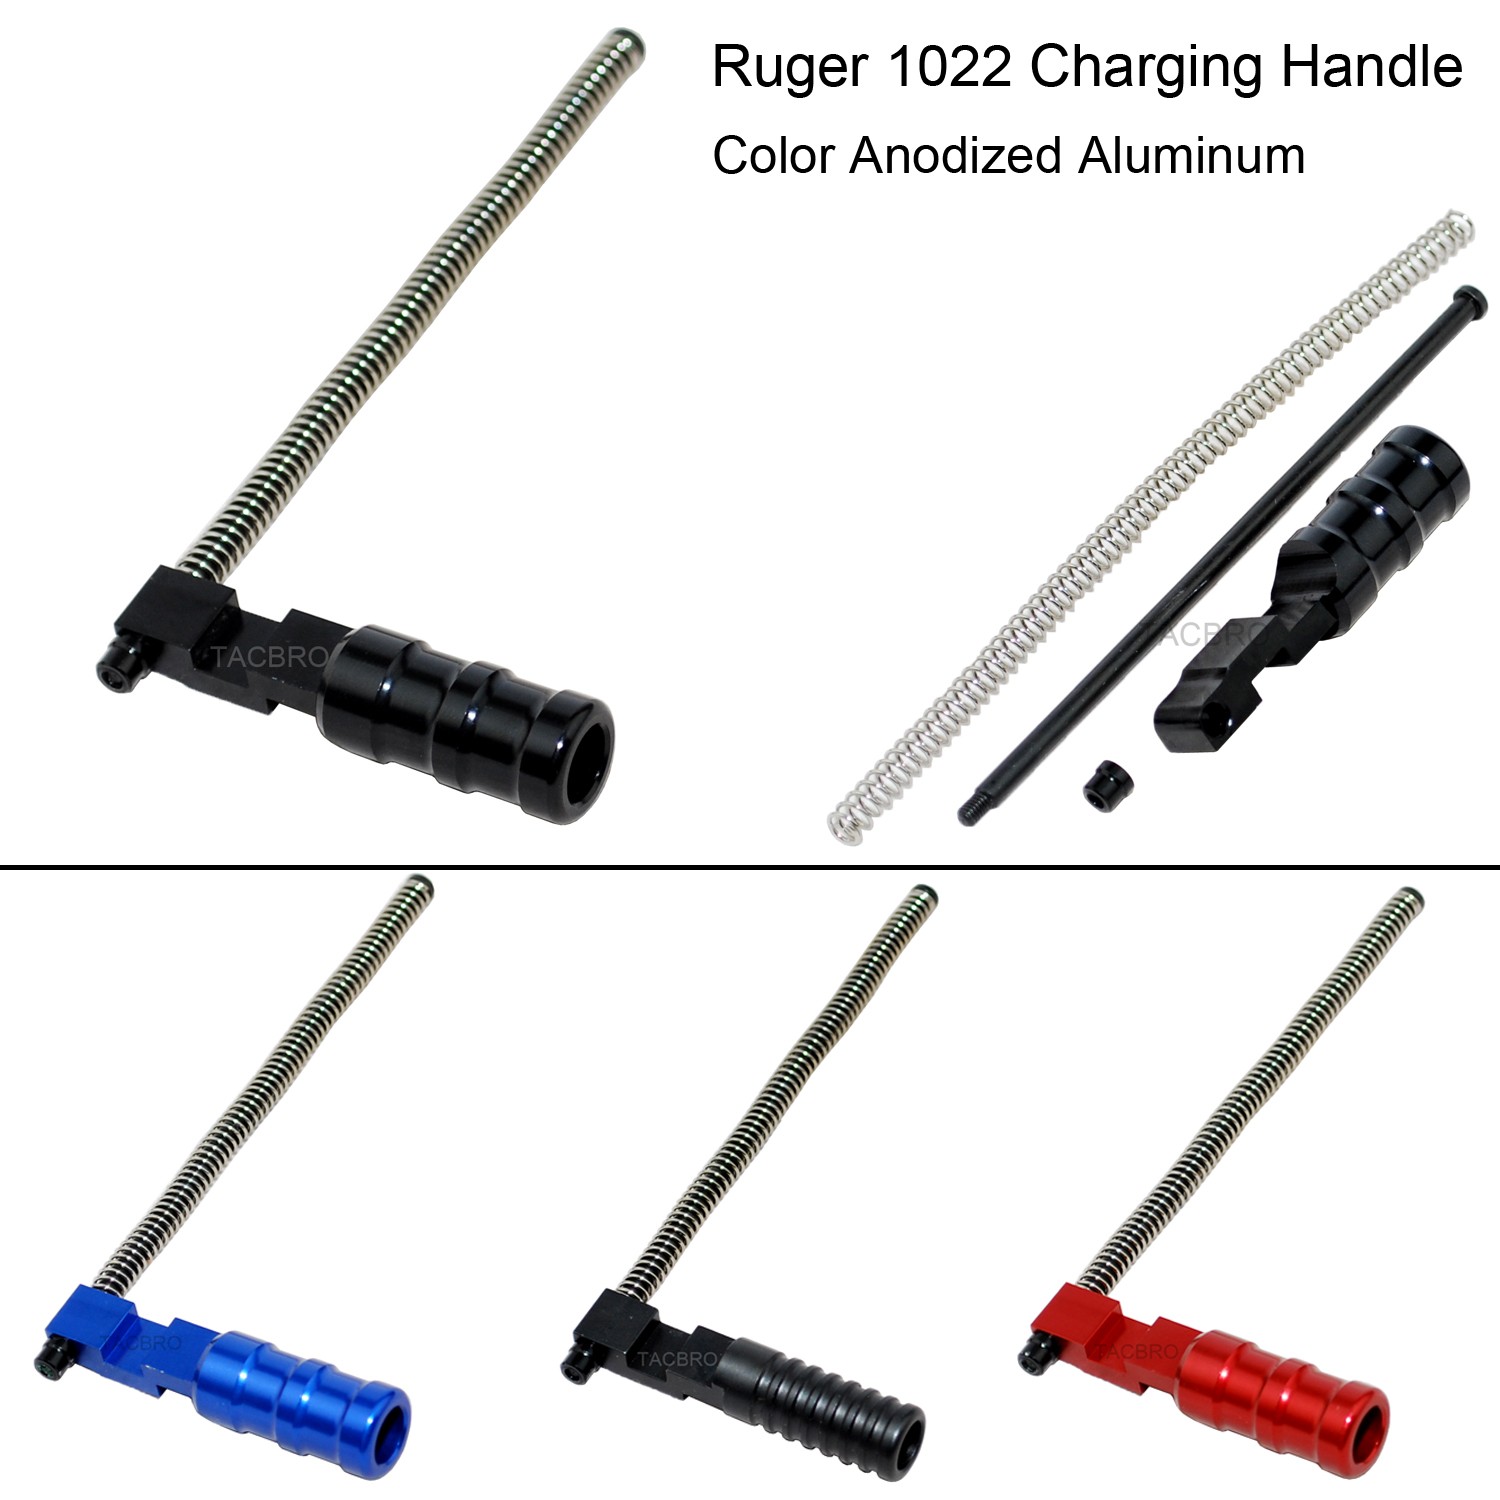 3 SPRINGS 10/22 Ruger Extended Charging Handle 1022 10-22 BLUE KNURLED 3/4 in 